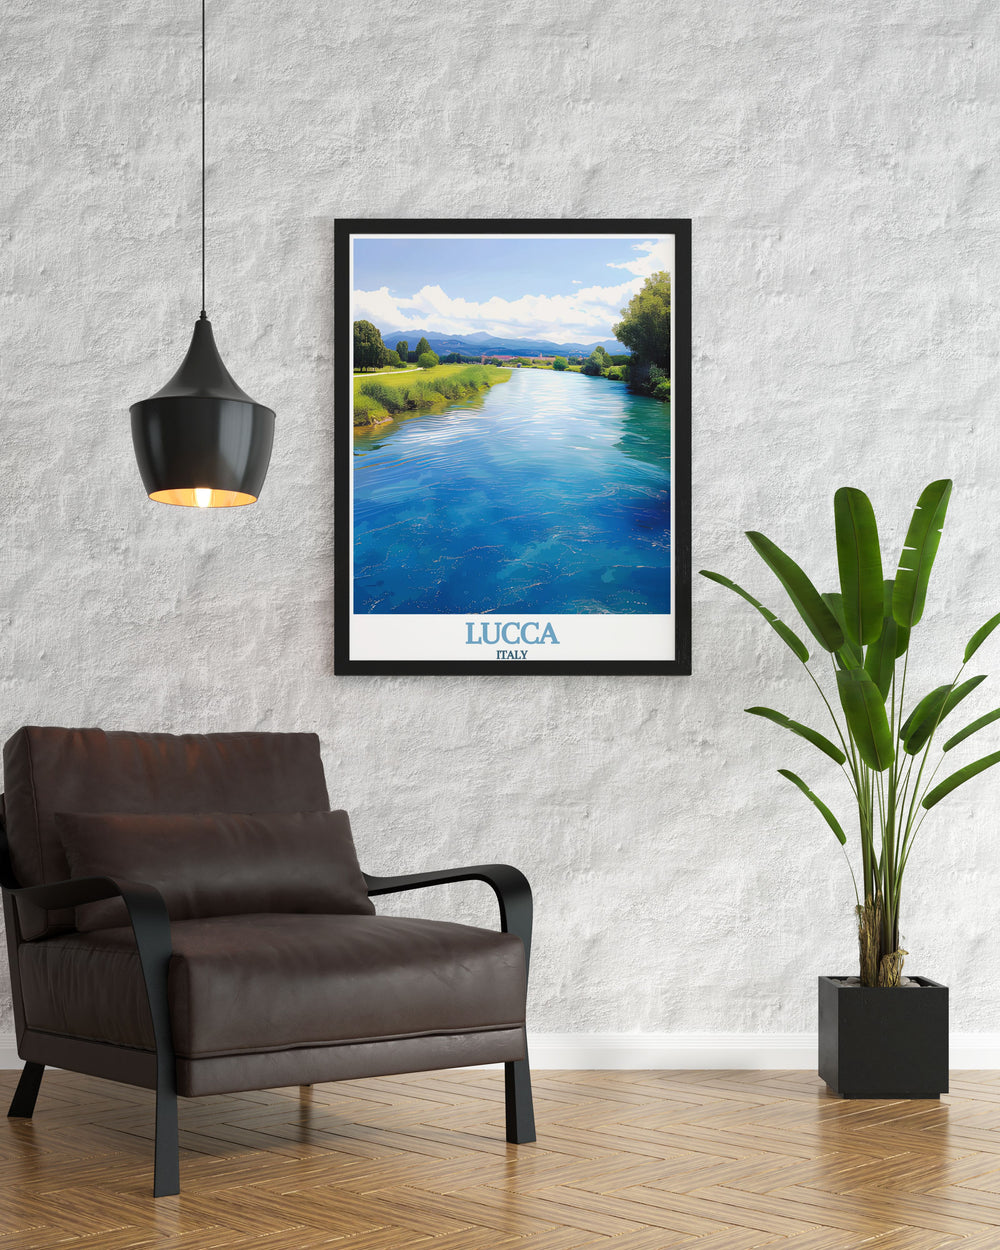 Colorful Lucca Art Print featuring the intricate city map design paired with the serene beauty of Serchio River stunning prints ideal for enhancing your home decor